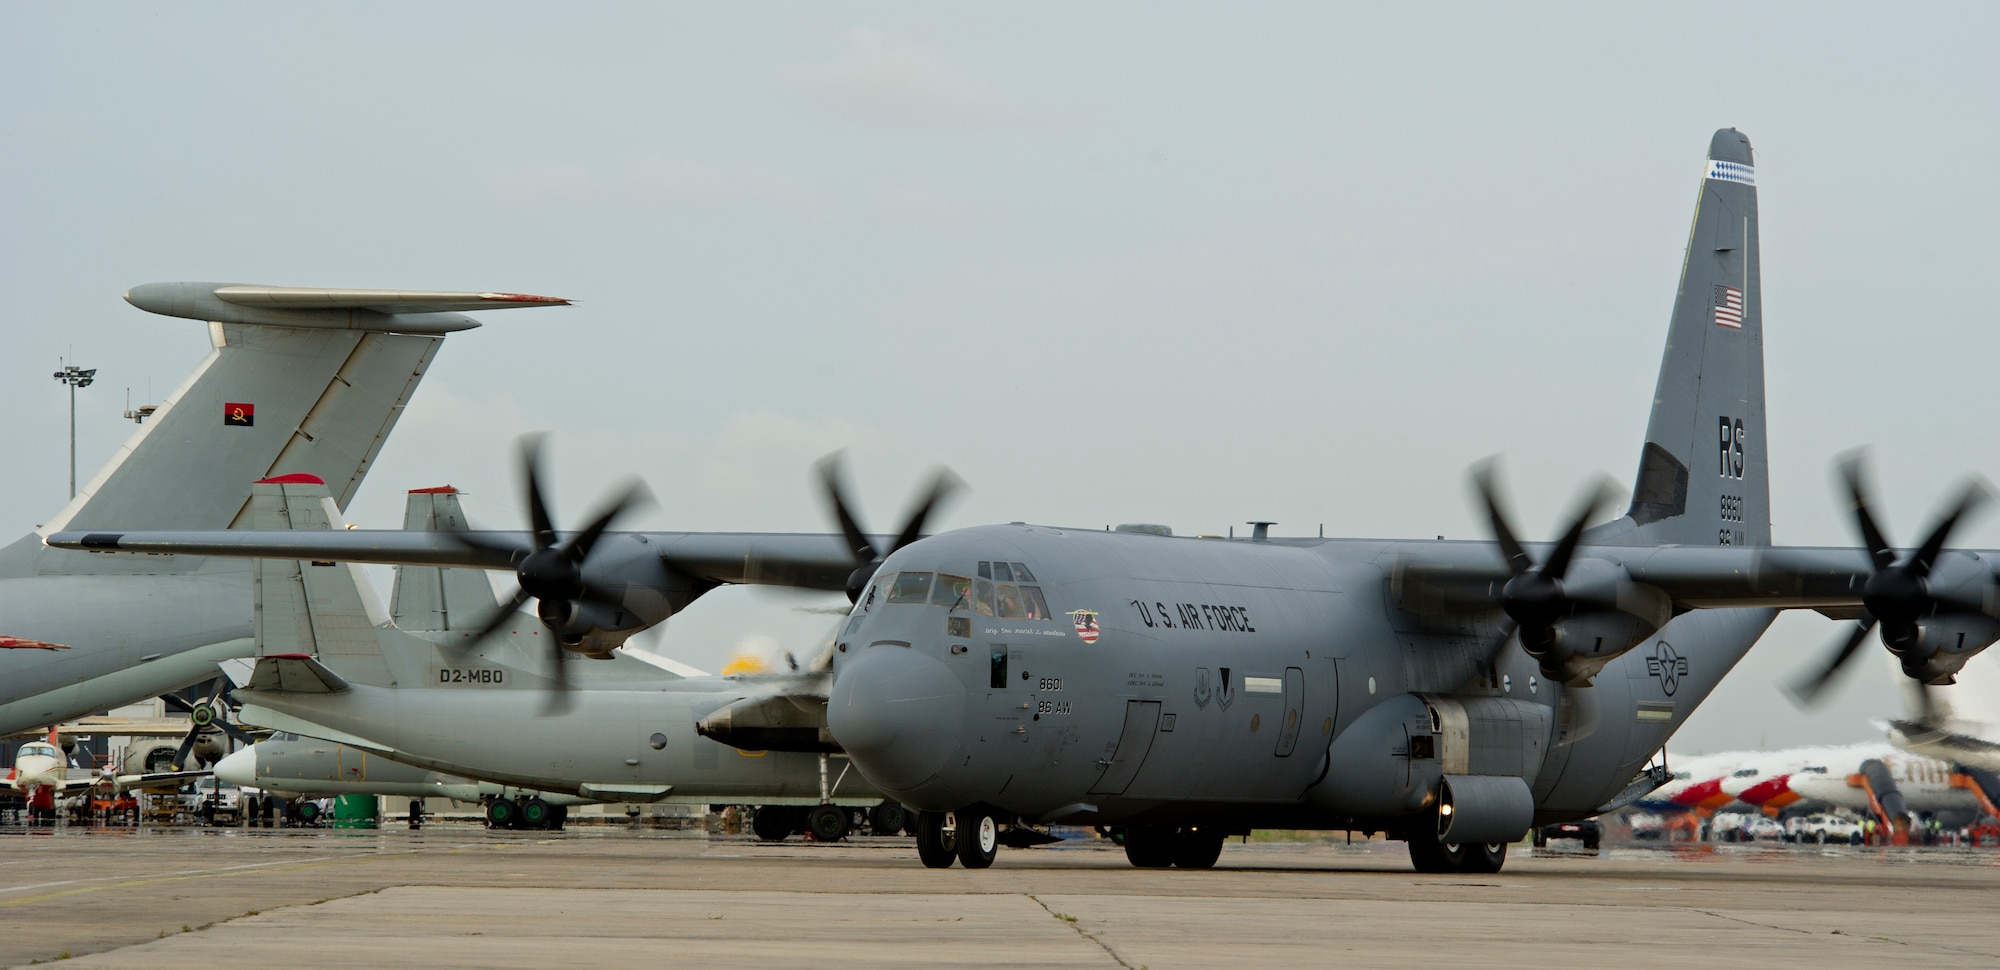 A C-130J Super Hercules from the 37th Airlift Squadron arrives at Luanda Air Base, Angola, March 22, 2014. The C-130J and about 20 U.S. Air Force airmen are in Angola to participate in African Partnership Flight with the Angolan and Zambian air forces, an event which provides a collaborative learning environment for the airmen. (U.S. Air Force photo/Tech. Sgt. Benjamin Wilson)